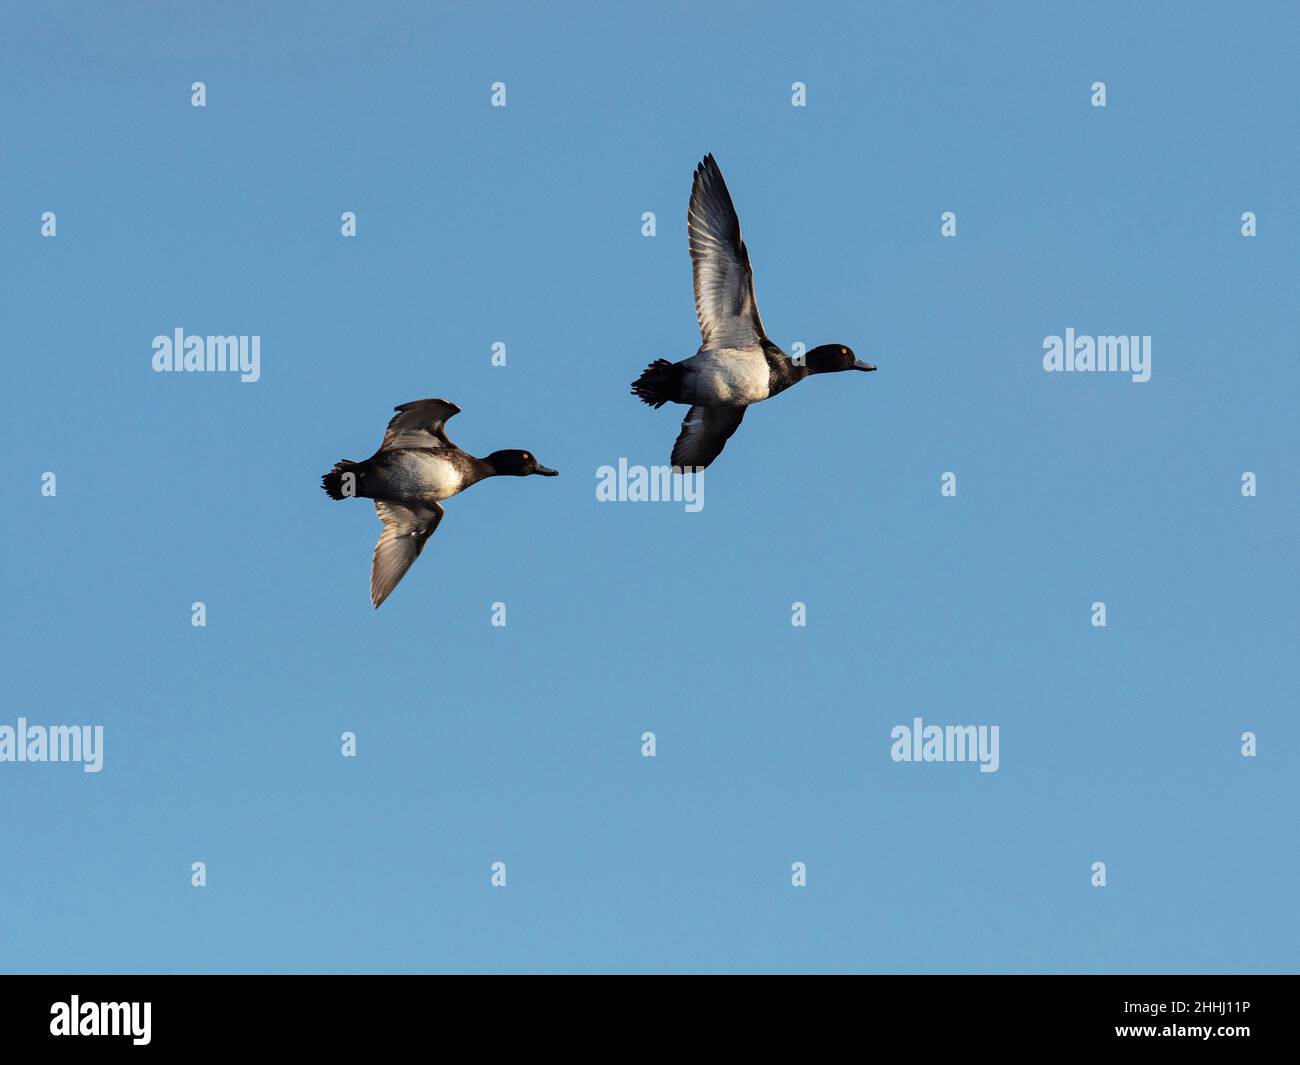 Tufted duck Aythya fuligula air in flight, Ham Wall RSPB Reserve, Meare, Avalon Marshes, Somerset Levels and Moors, England, UK, December 2019 Stock Photo